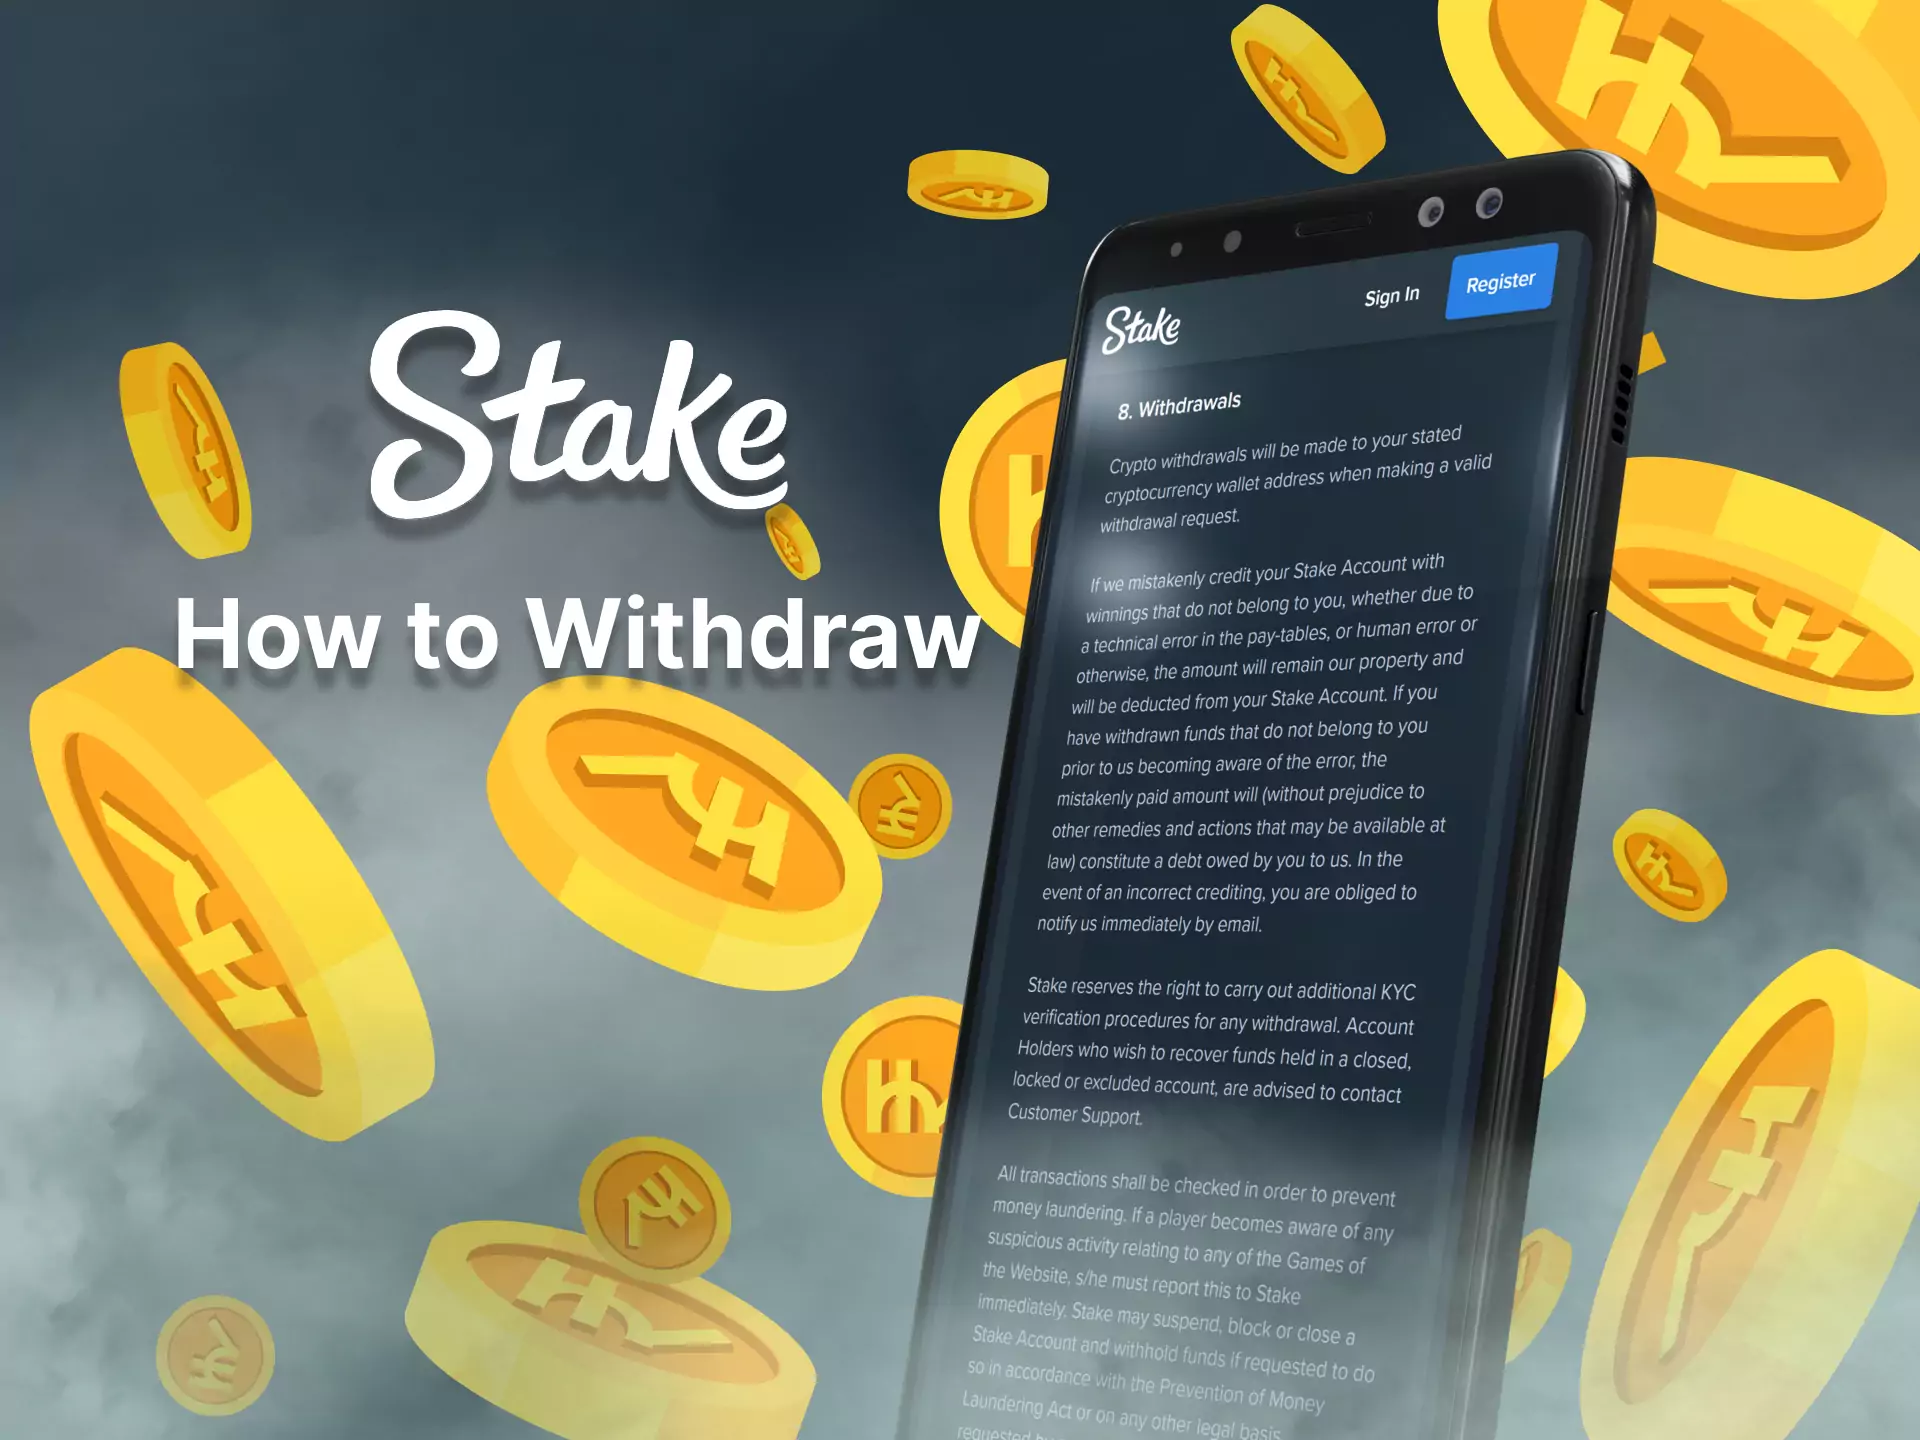 Use this instruction to withdraw money from Stake.com.